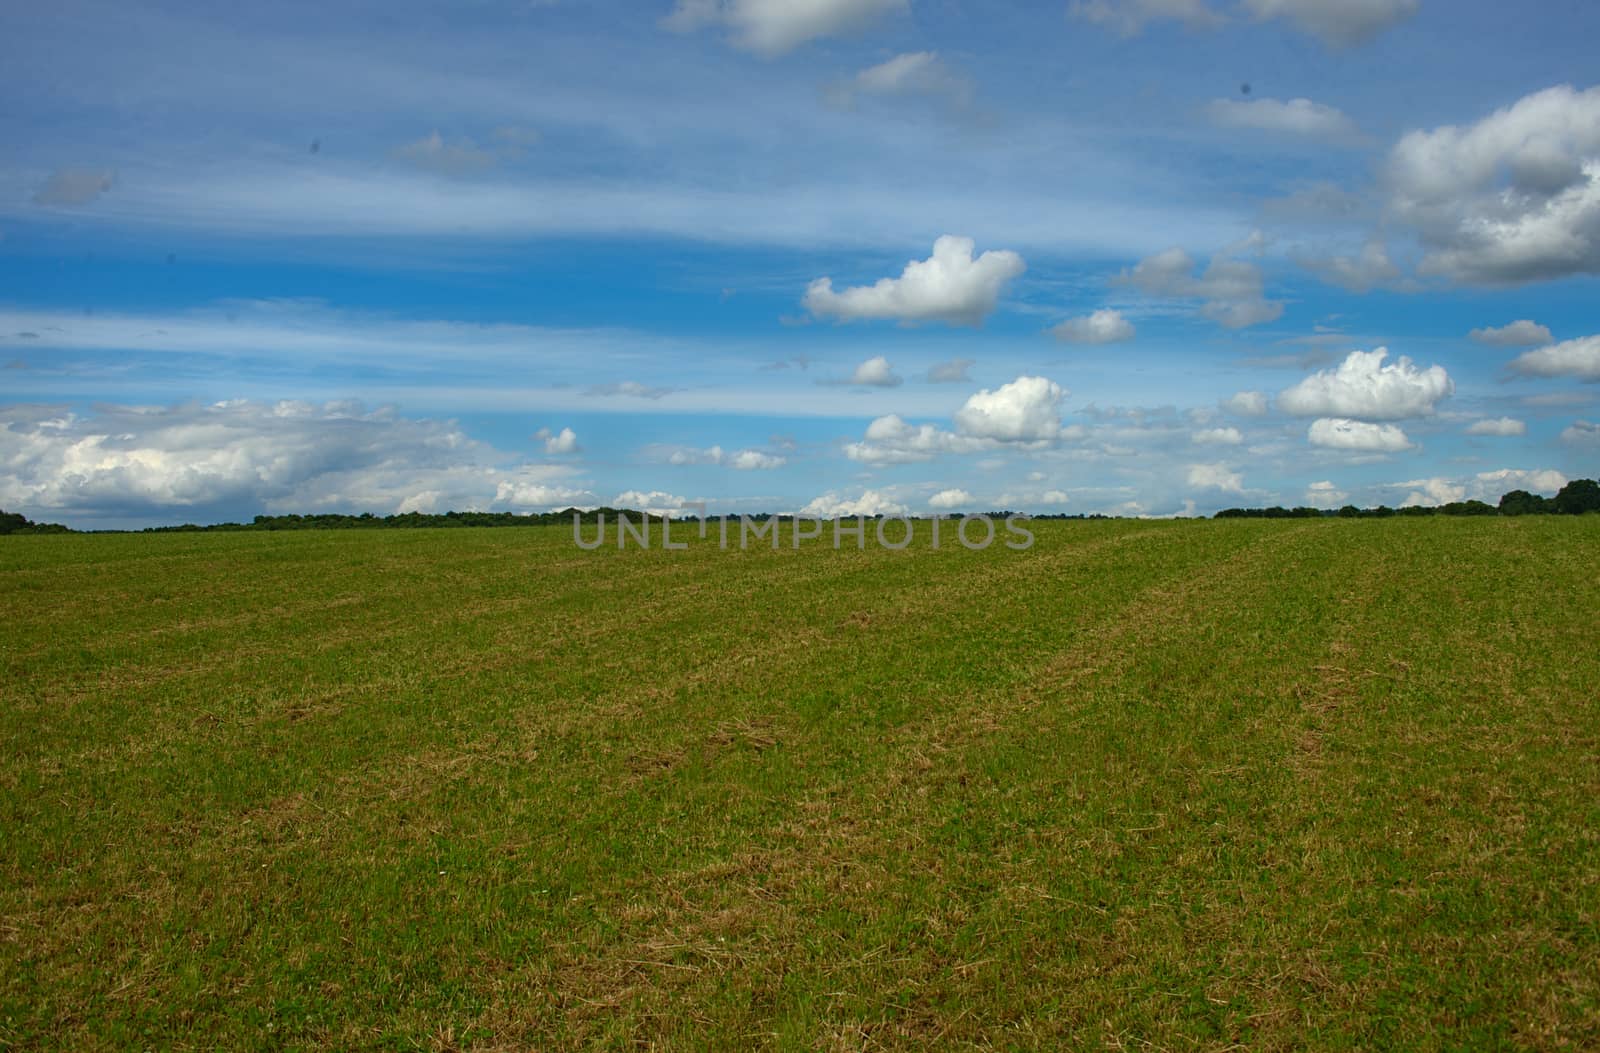 Green grass field and blue cloudy sky